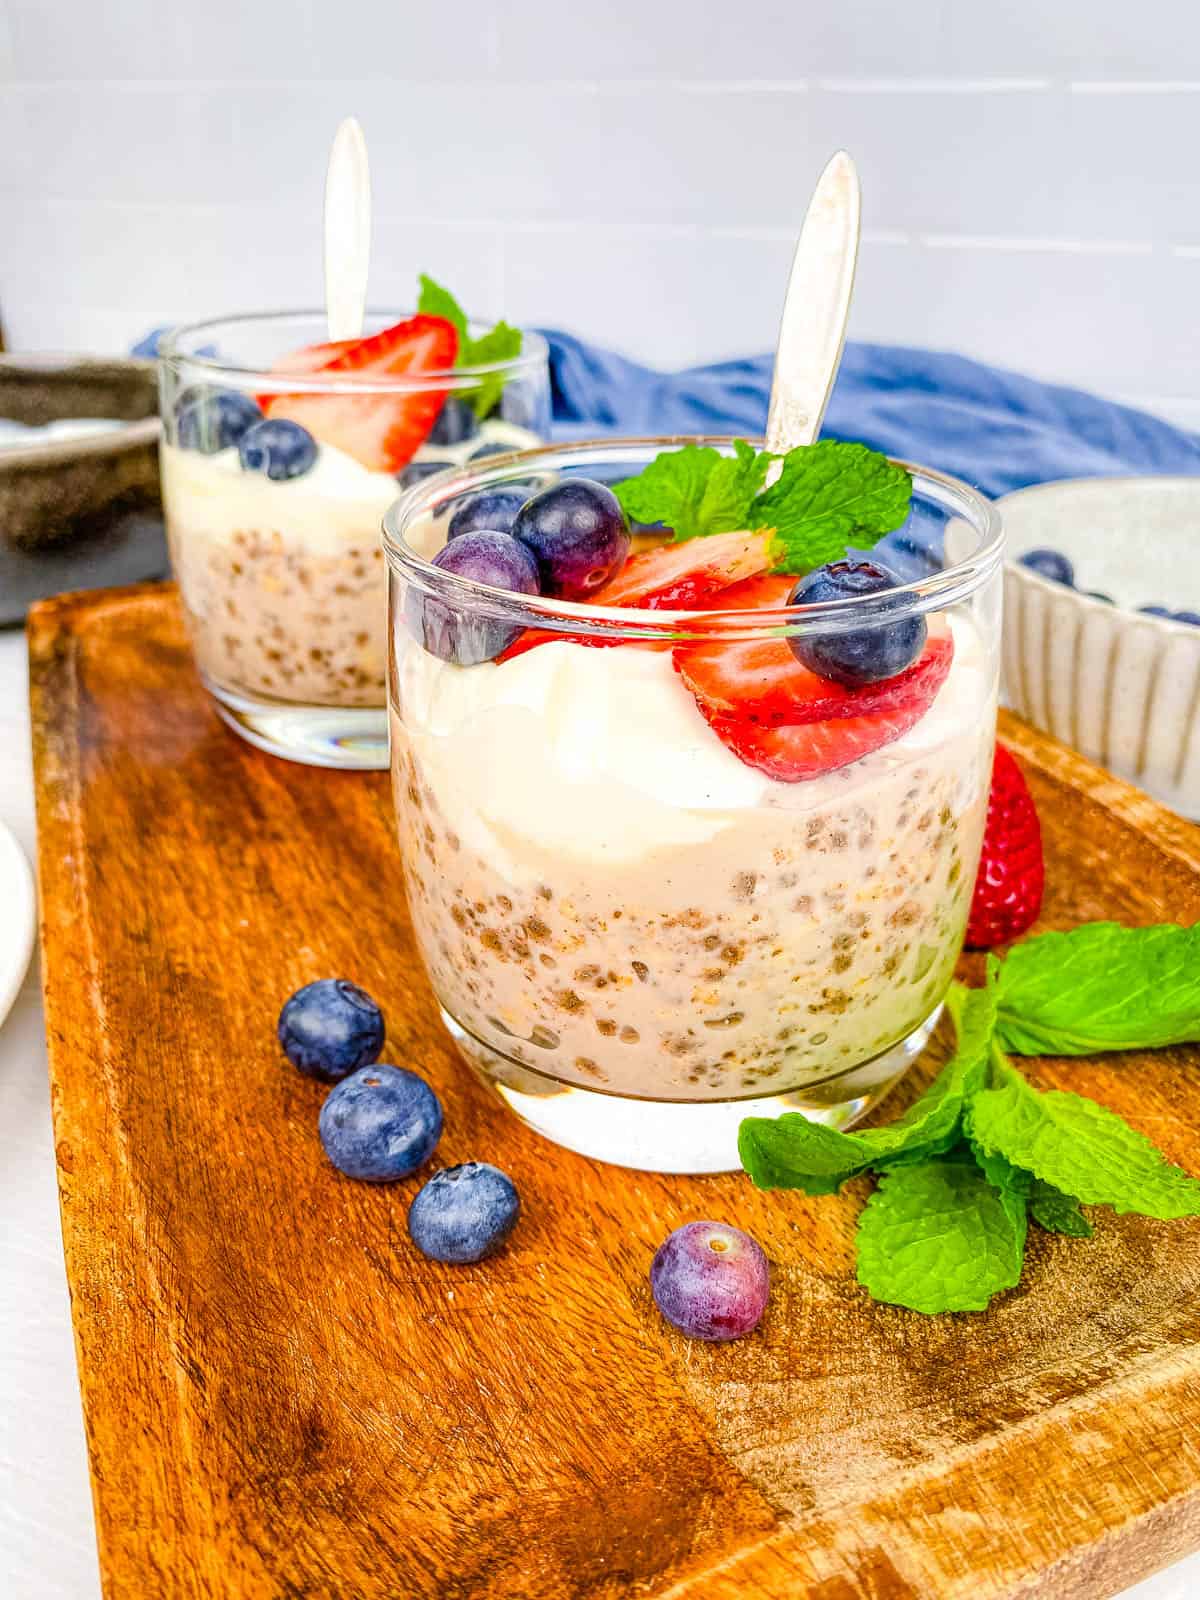 Healthy high protein overnight oats served in glasses with fresh berries and mint as a garnish.